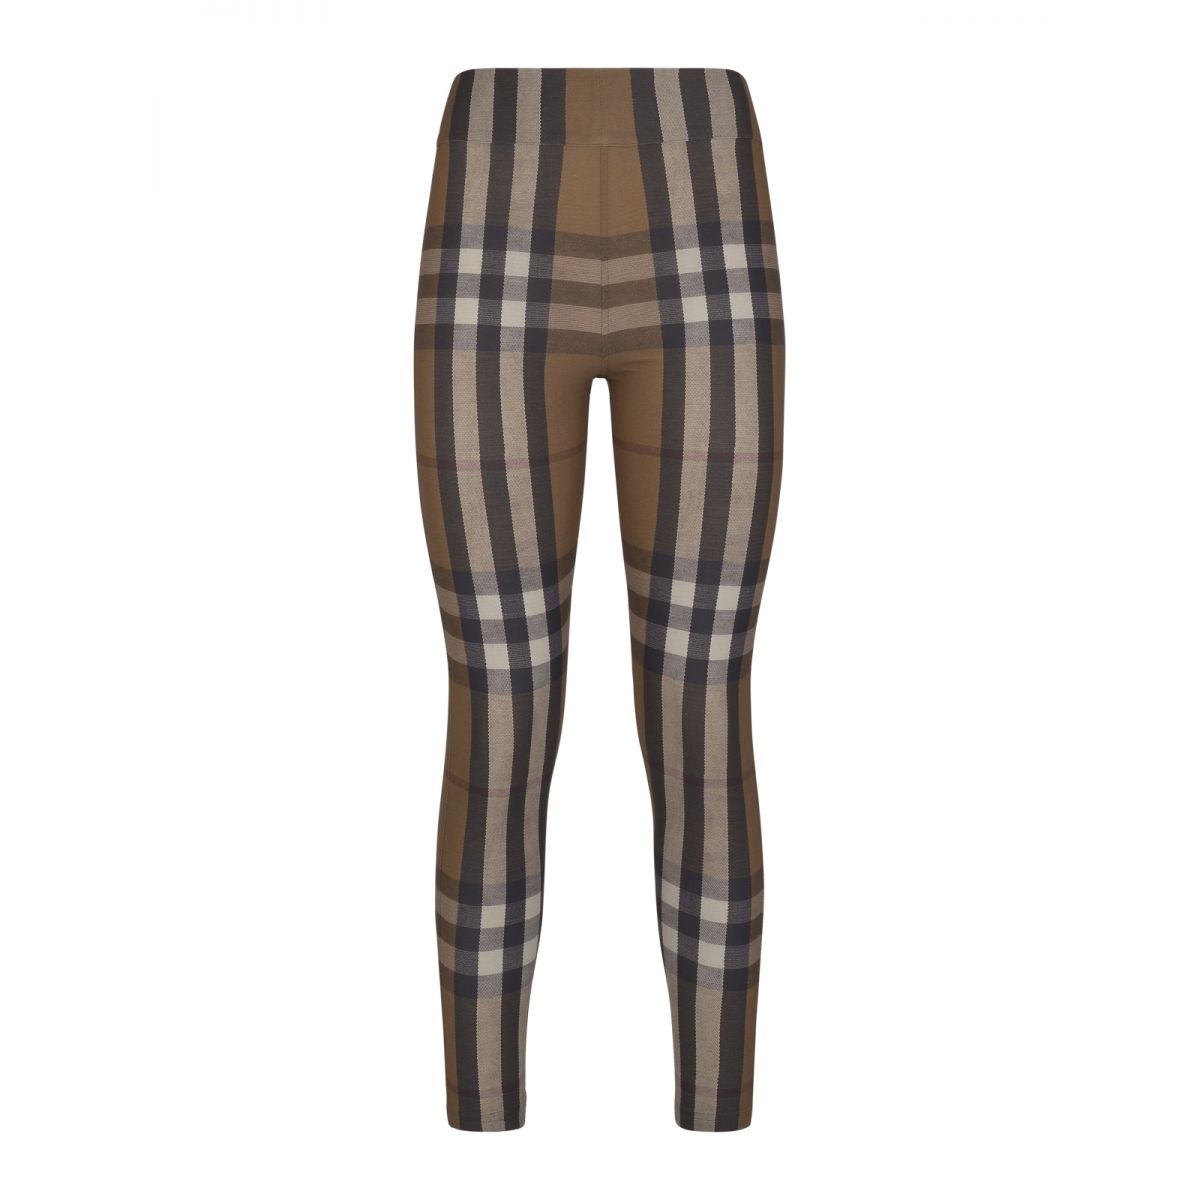 BURBERRY - Check stretch jersey leggings